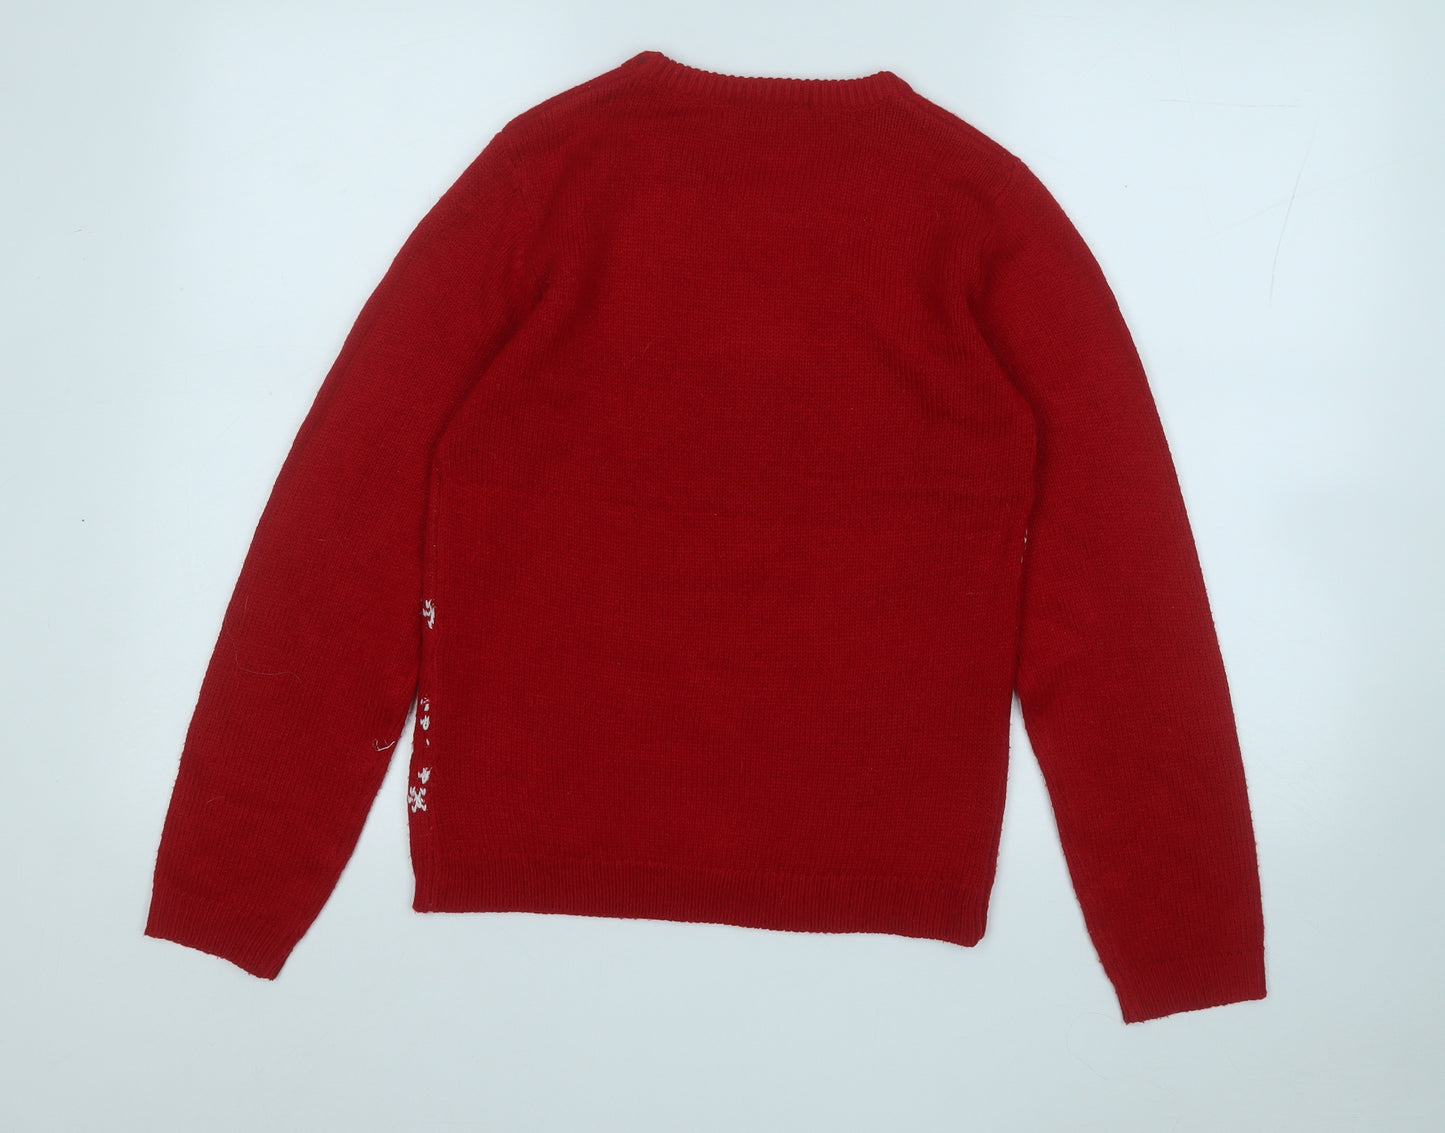 Pep&Co Boys Red Round Neck  Acrylic Pullover Jumper Size 12 Years   - Christmas Jumper